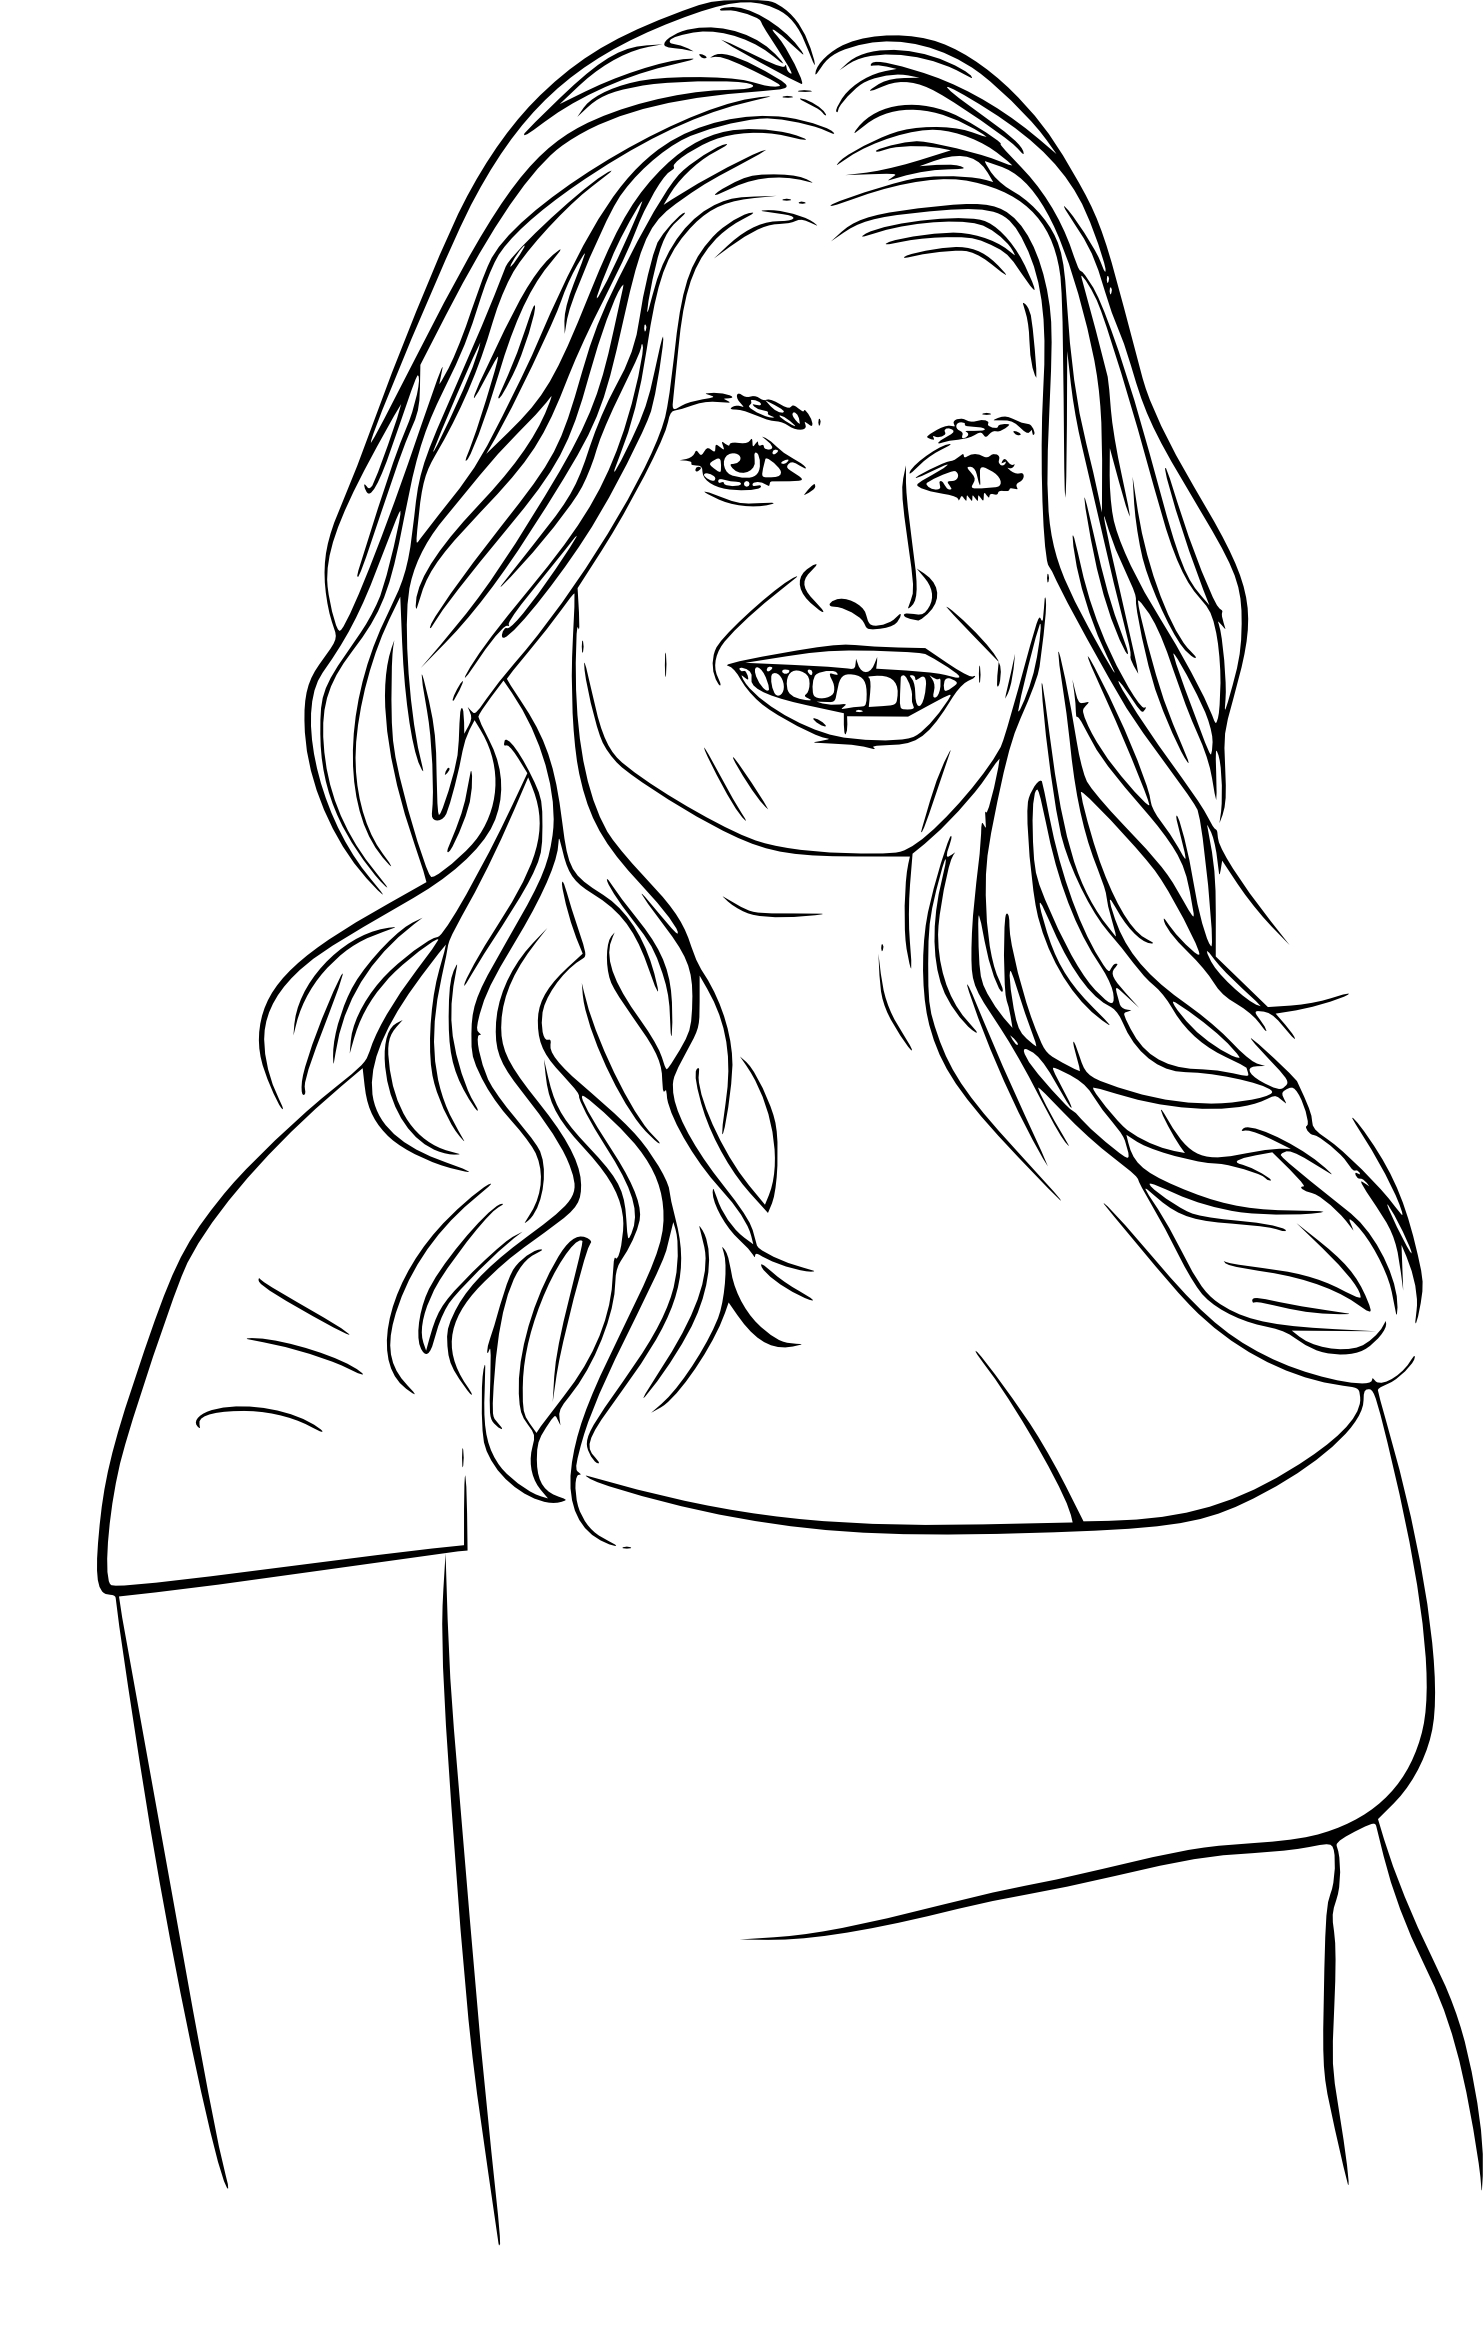 Jessica Simpson coloring page